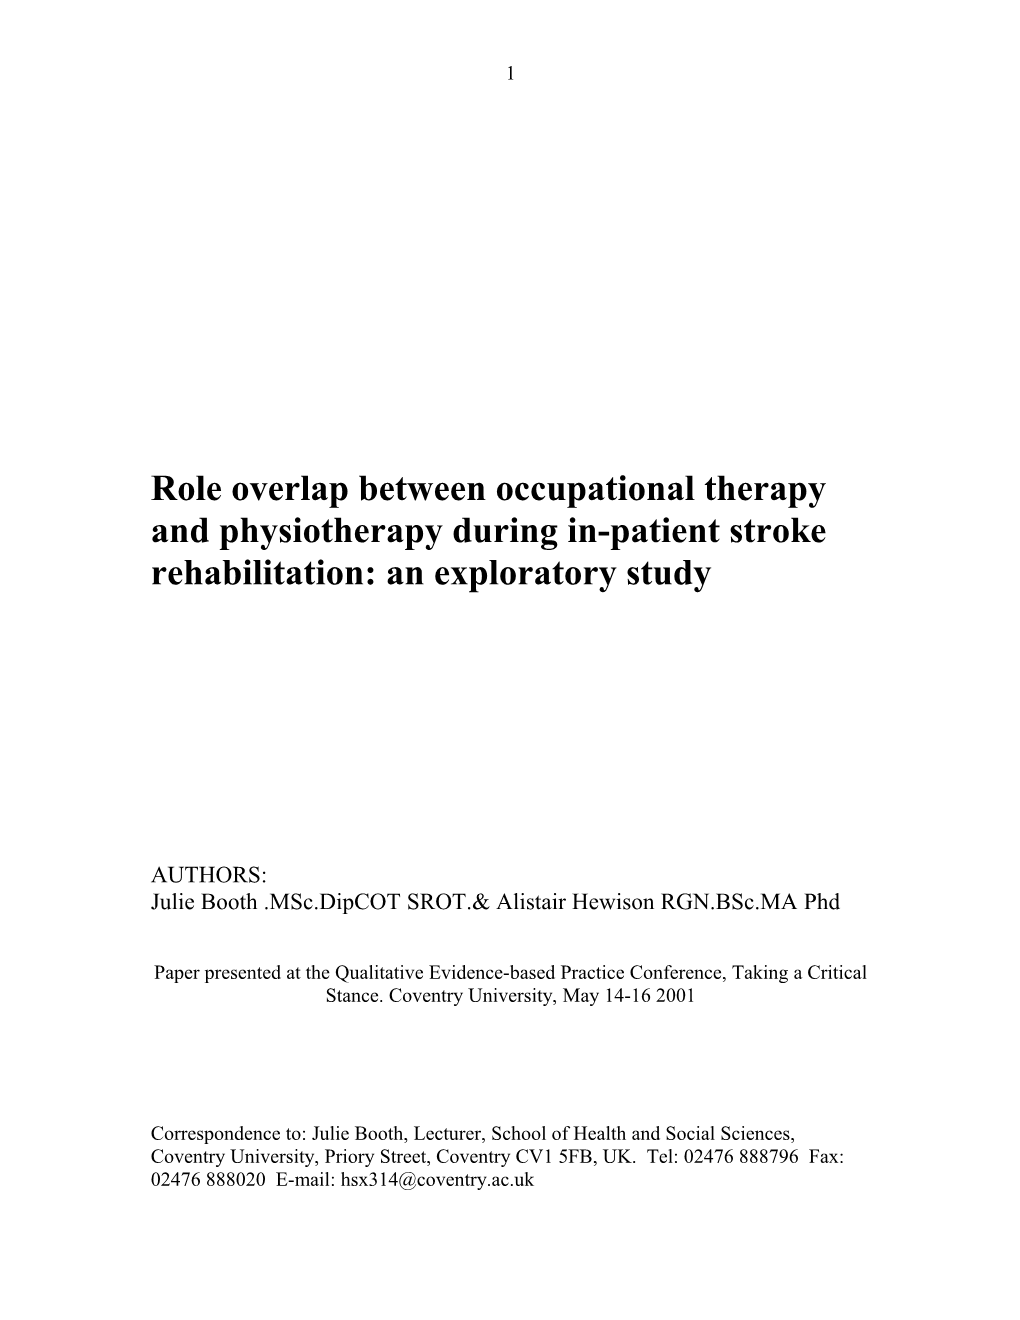 Role Overlap Between Occupational Therapy and Physiotherapy During In-Patient Stroke